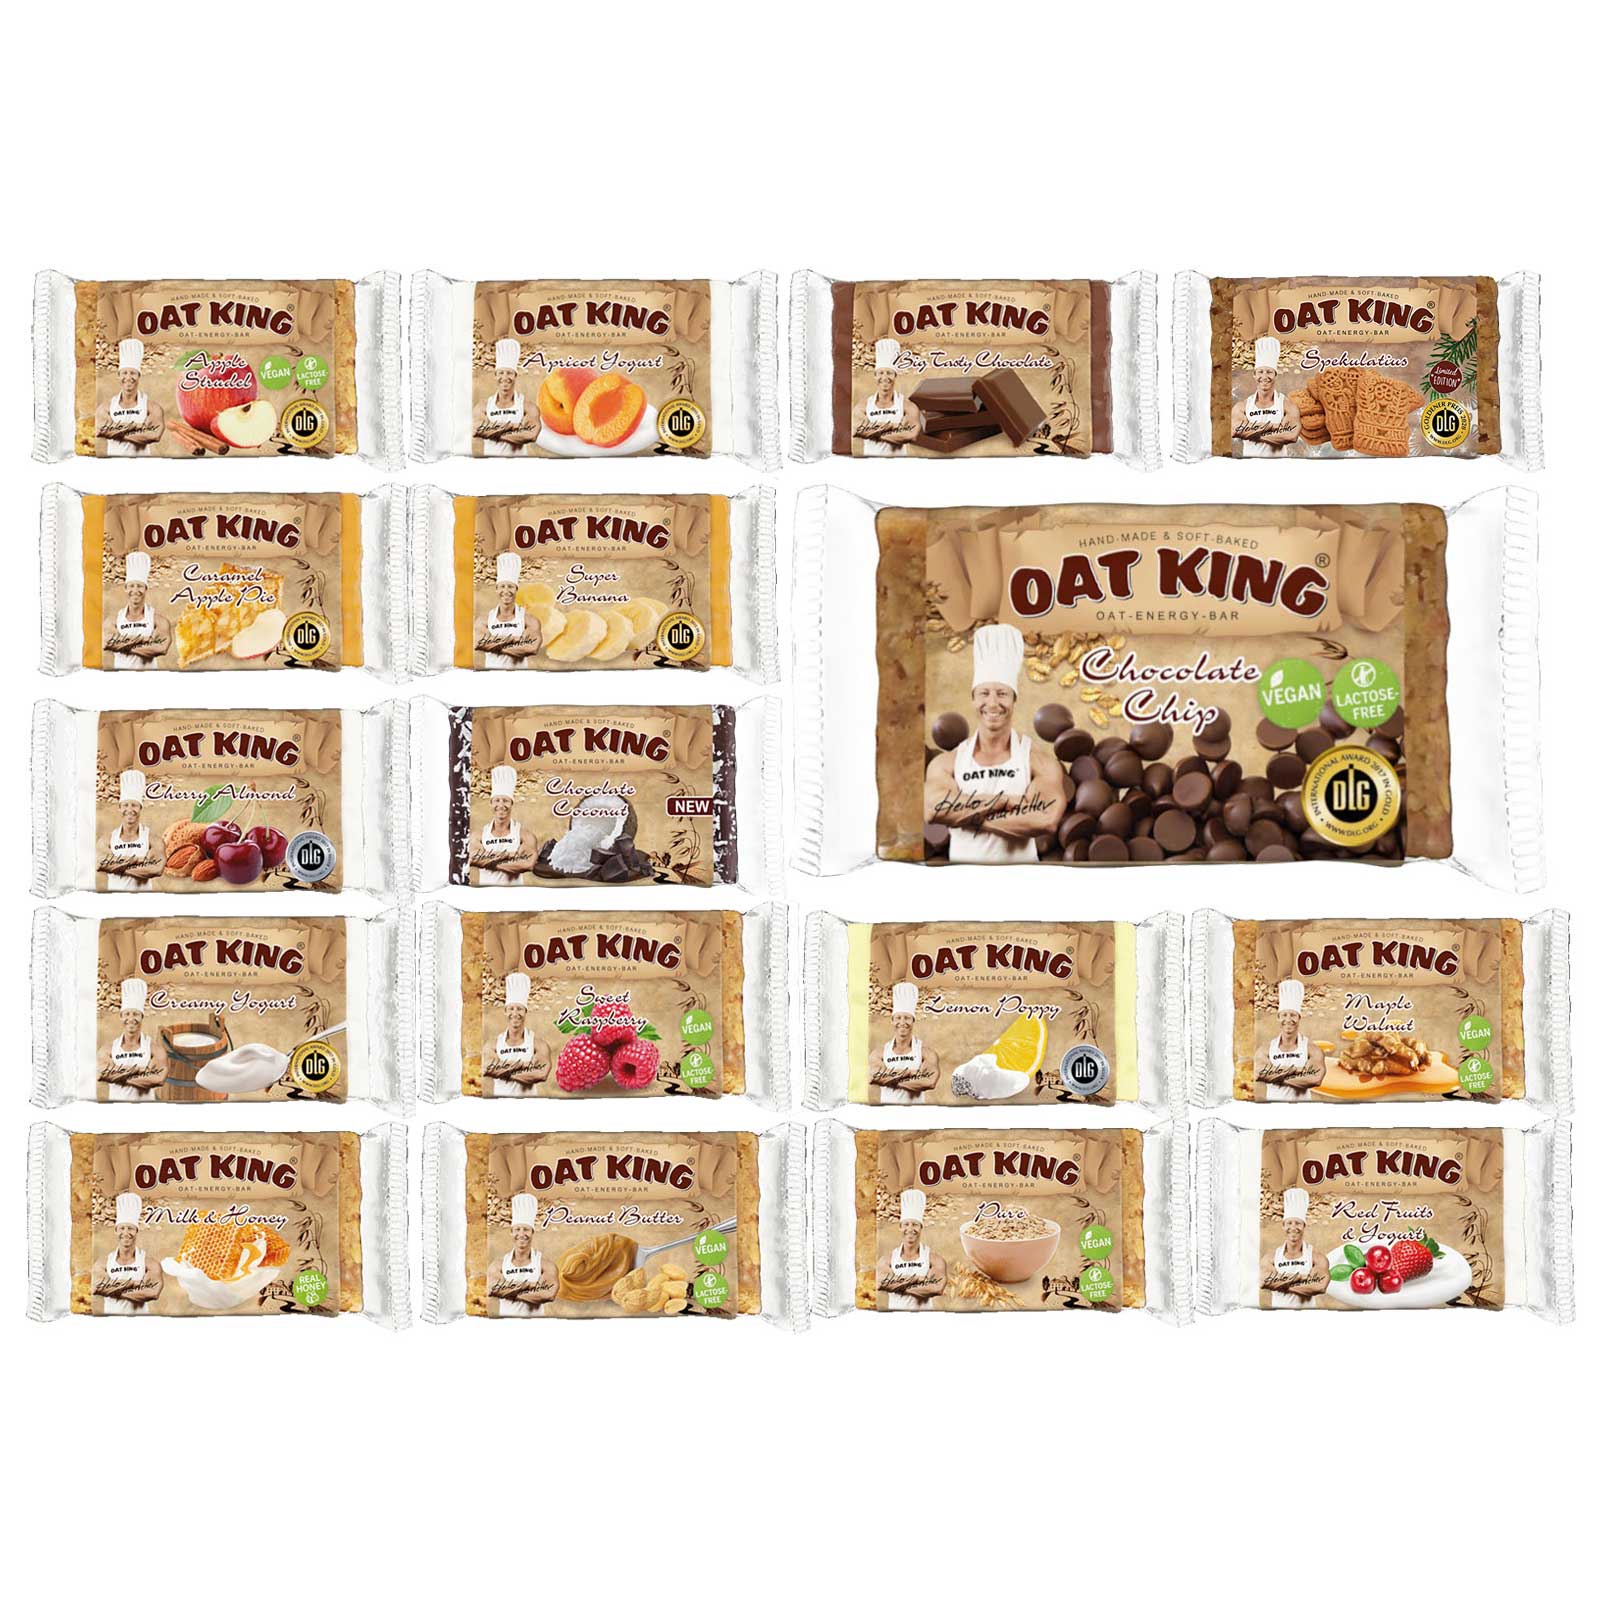 Productfoto van Oat King Bar with Carbohydrates - 95g